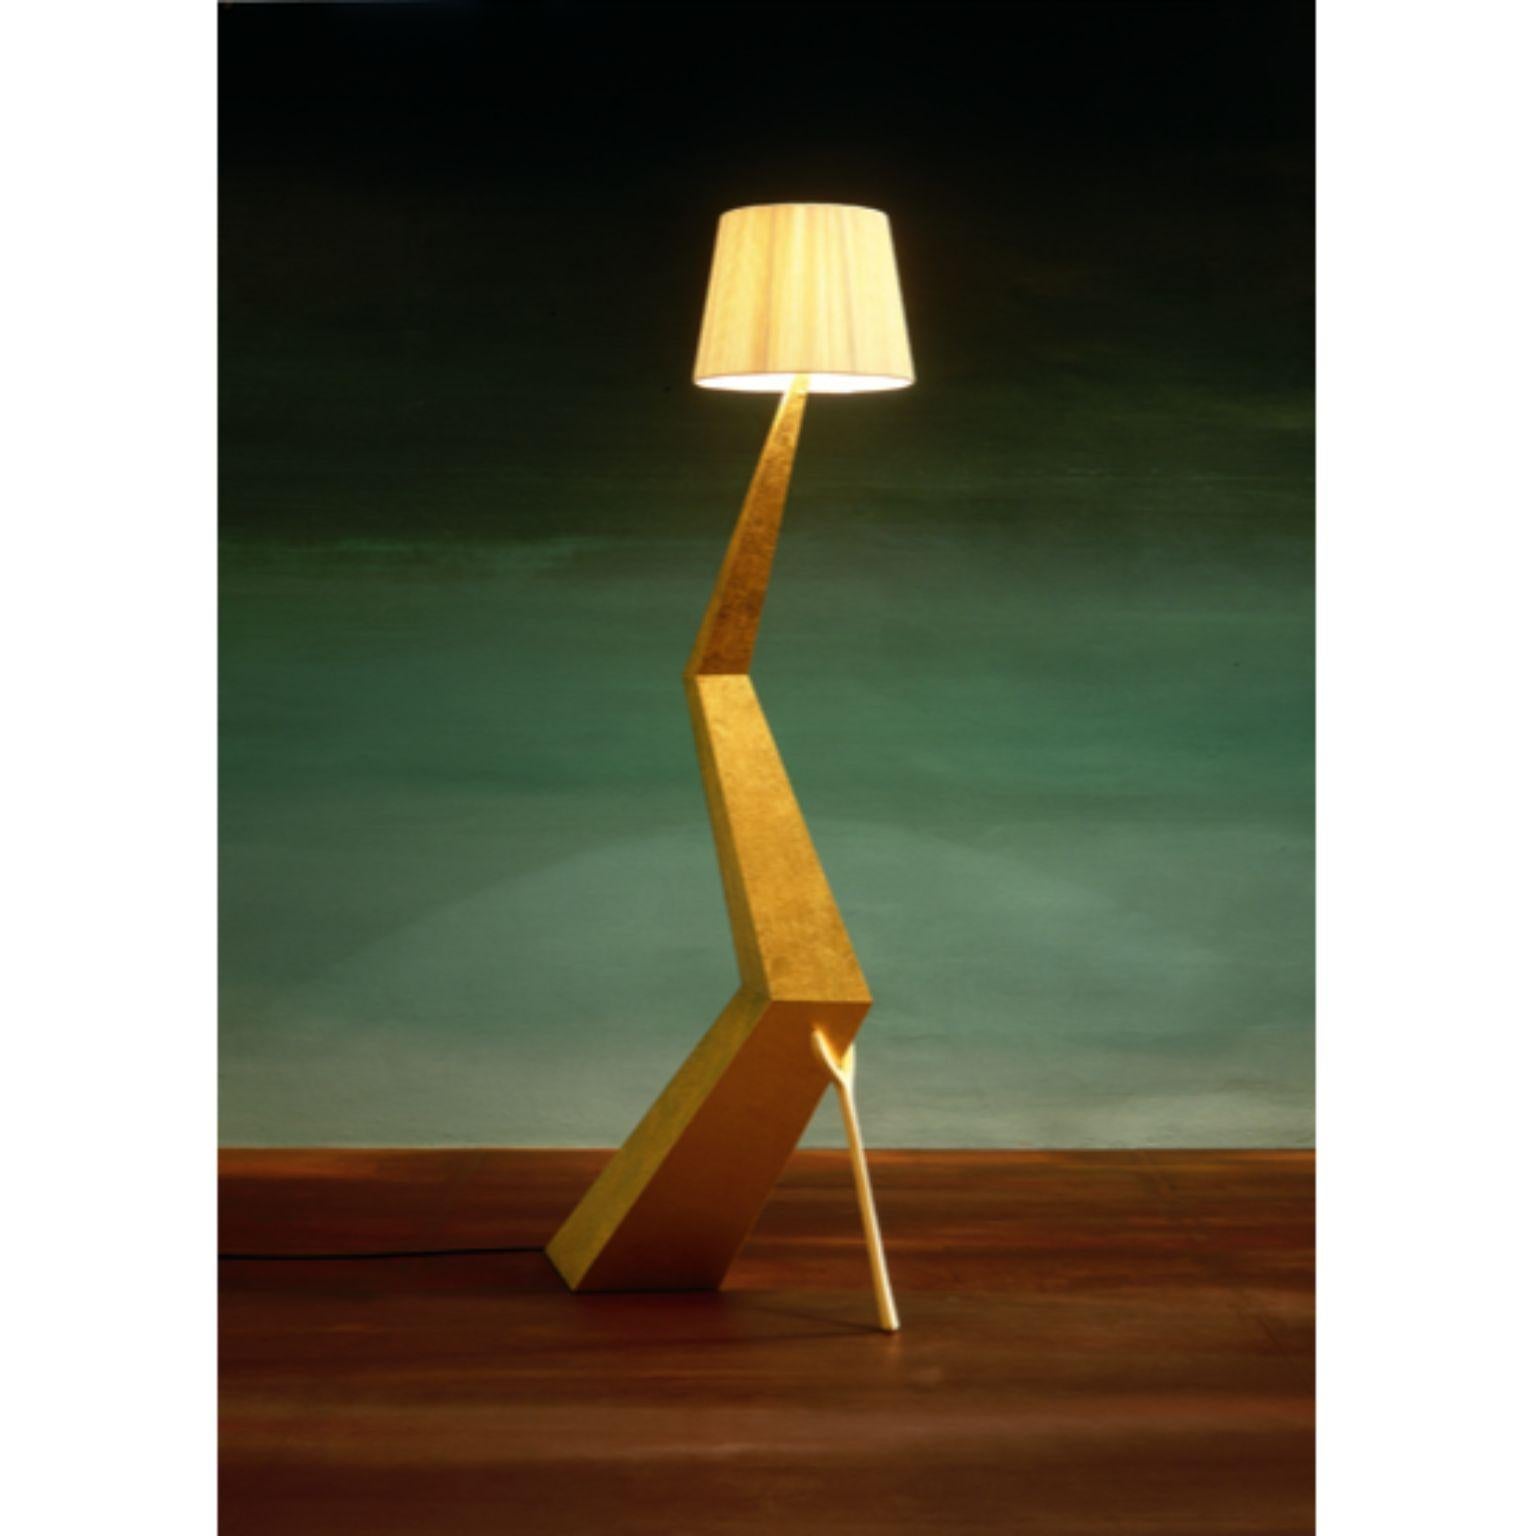 Bracelli lamp, Salvador Dalí.
Dimensions: 64 x 37 x 180 H cm.
Materials: Wooden board structure.
Ivory colored cotton and rayon fabric.

The Bracelli lamp has a wooden board structure covered in fine gilding also available in a darker version.